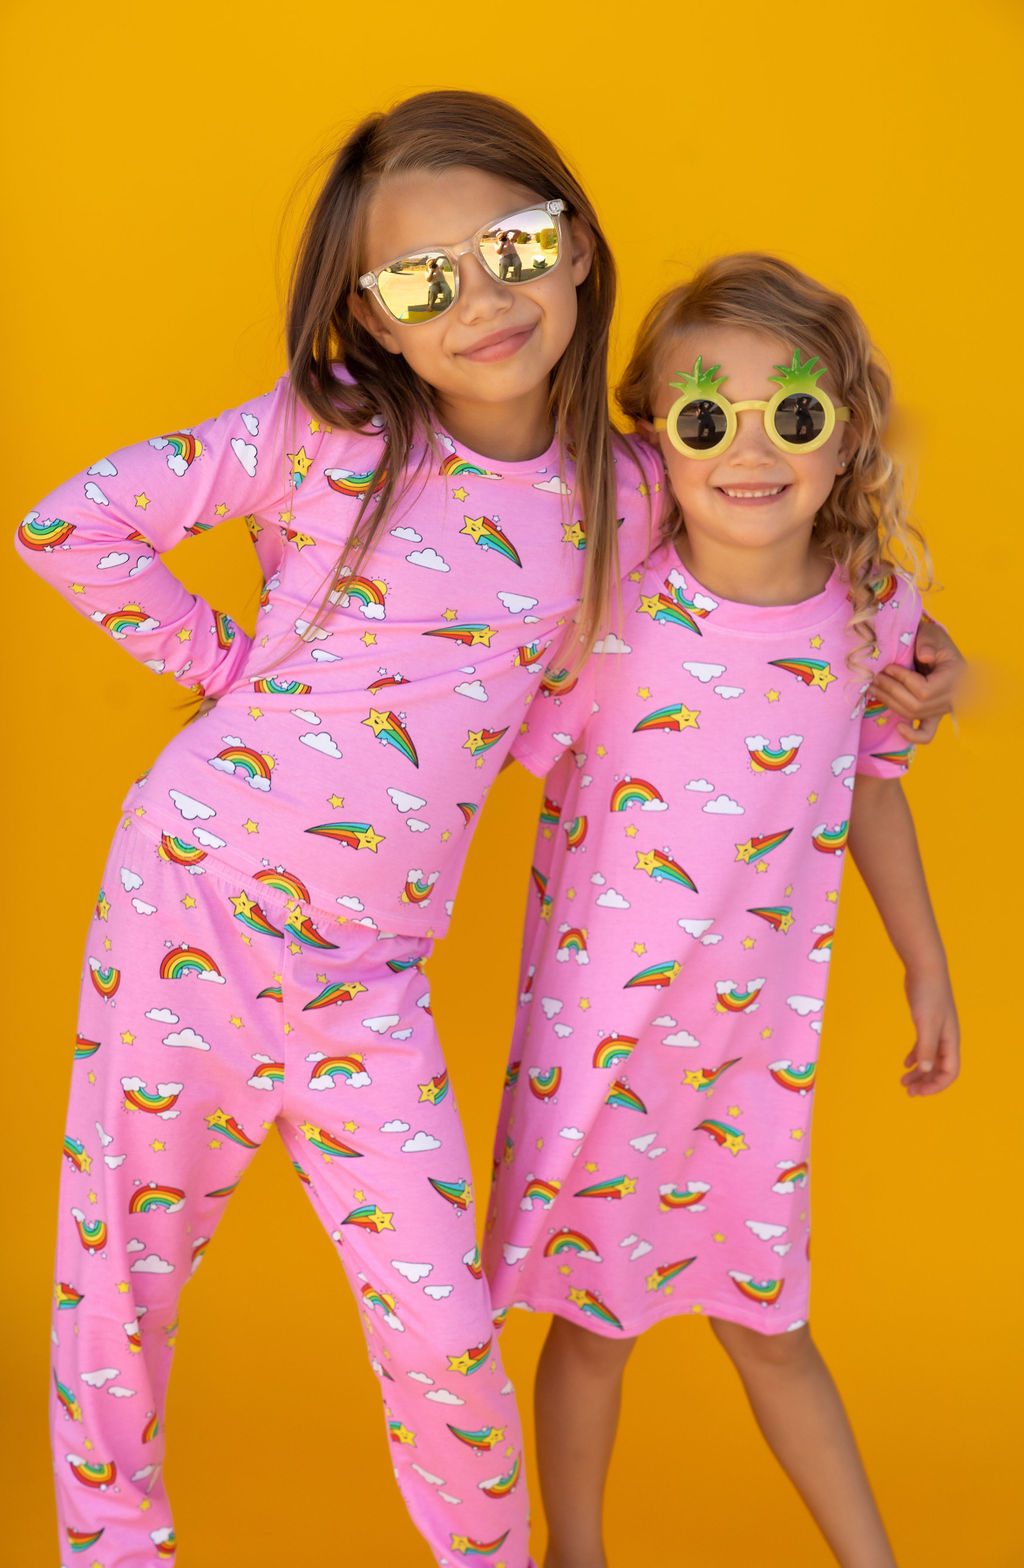 Two girls in matching Pink PJs and Lounge dress